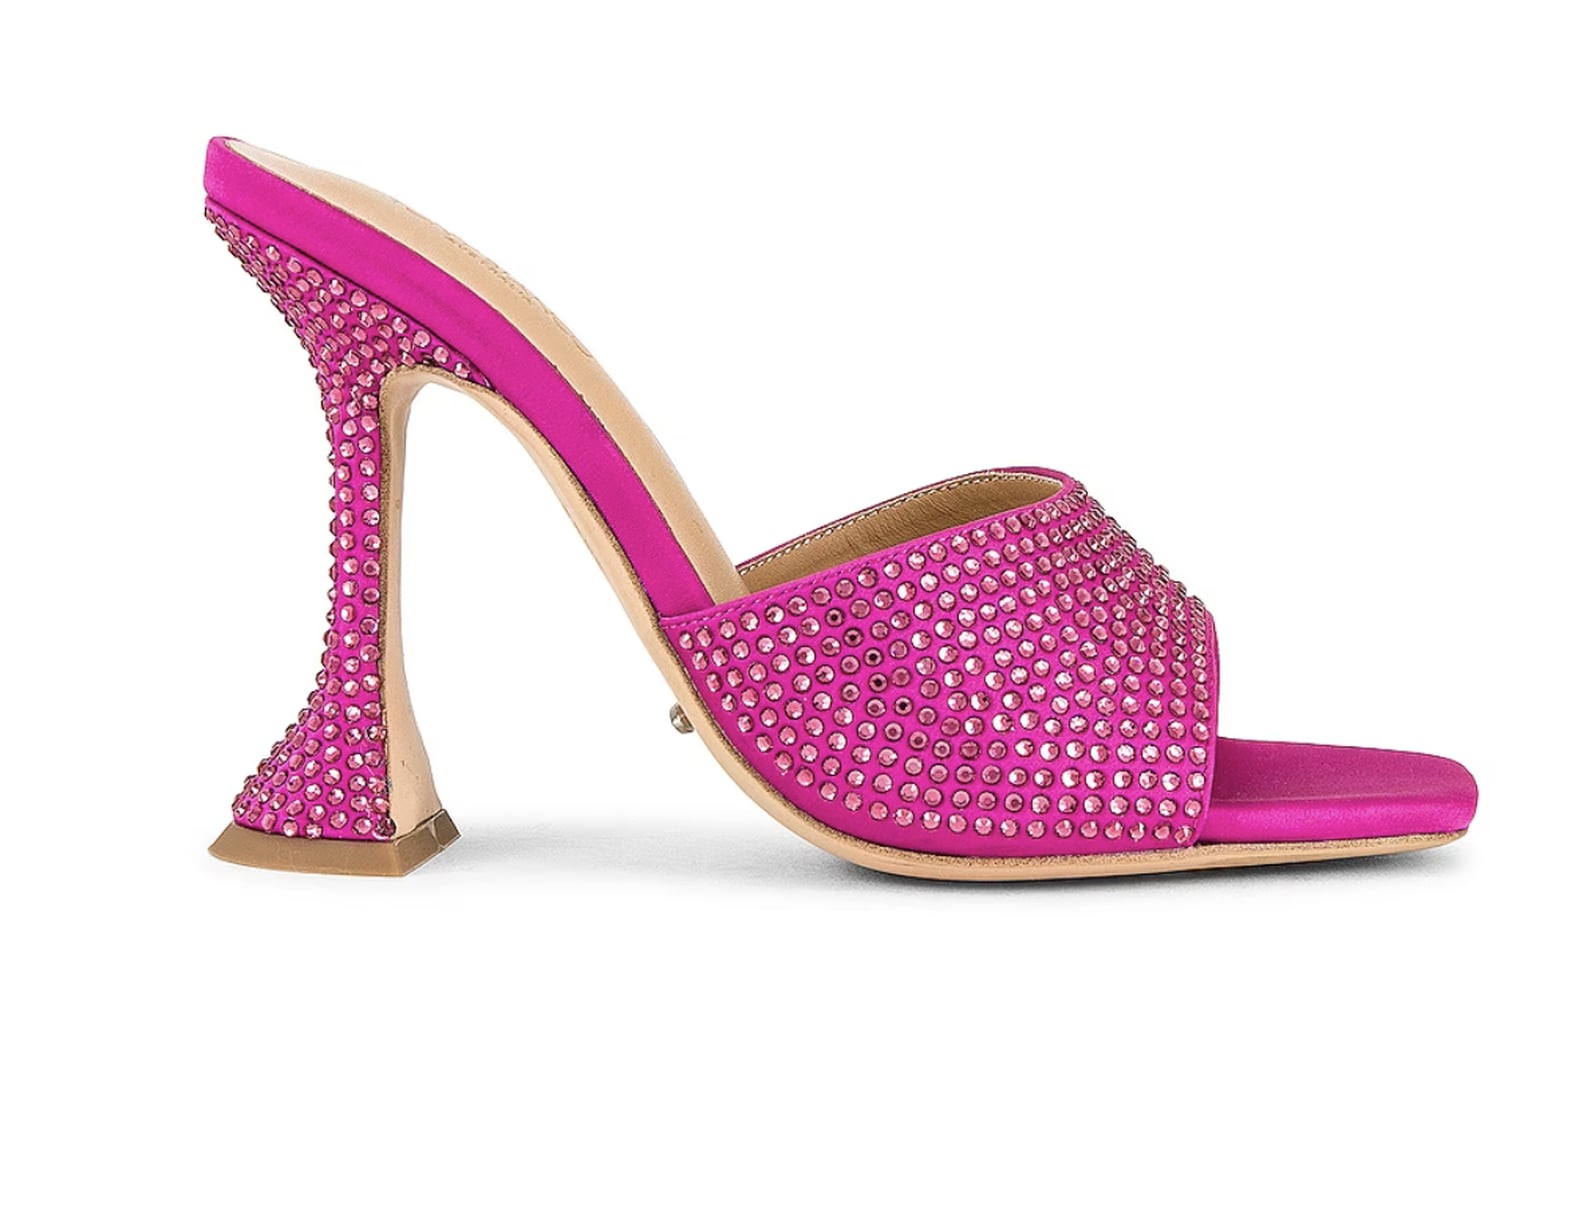 Shop Pink Feathery Heels Inspired by the Barbie Movie | POPSUGAR Fashion